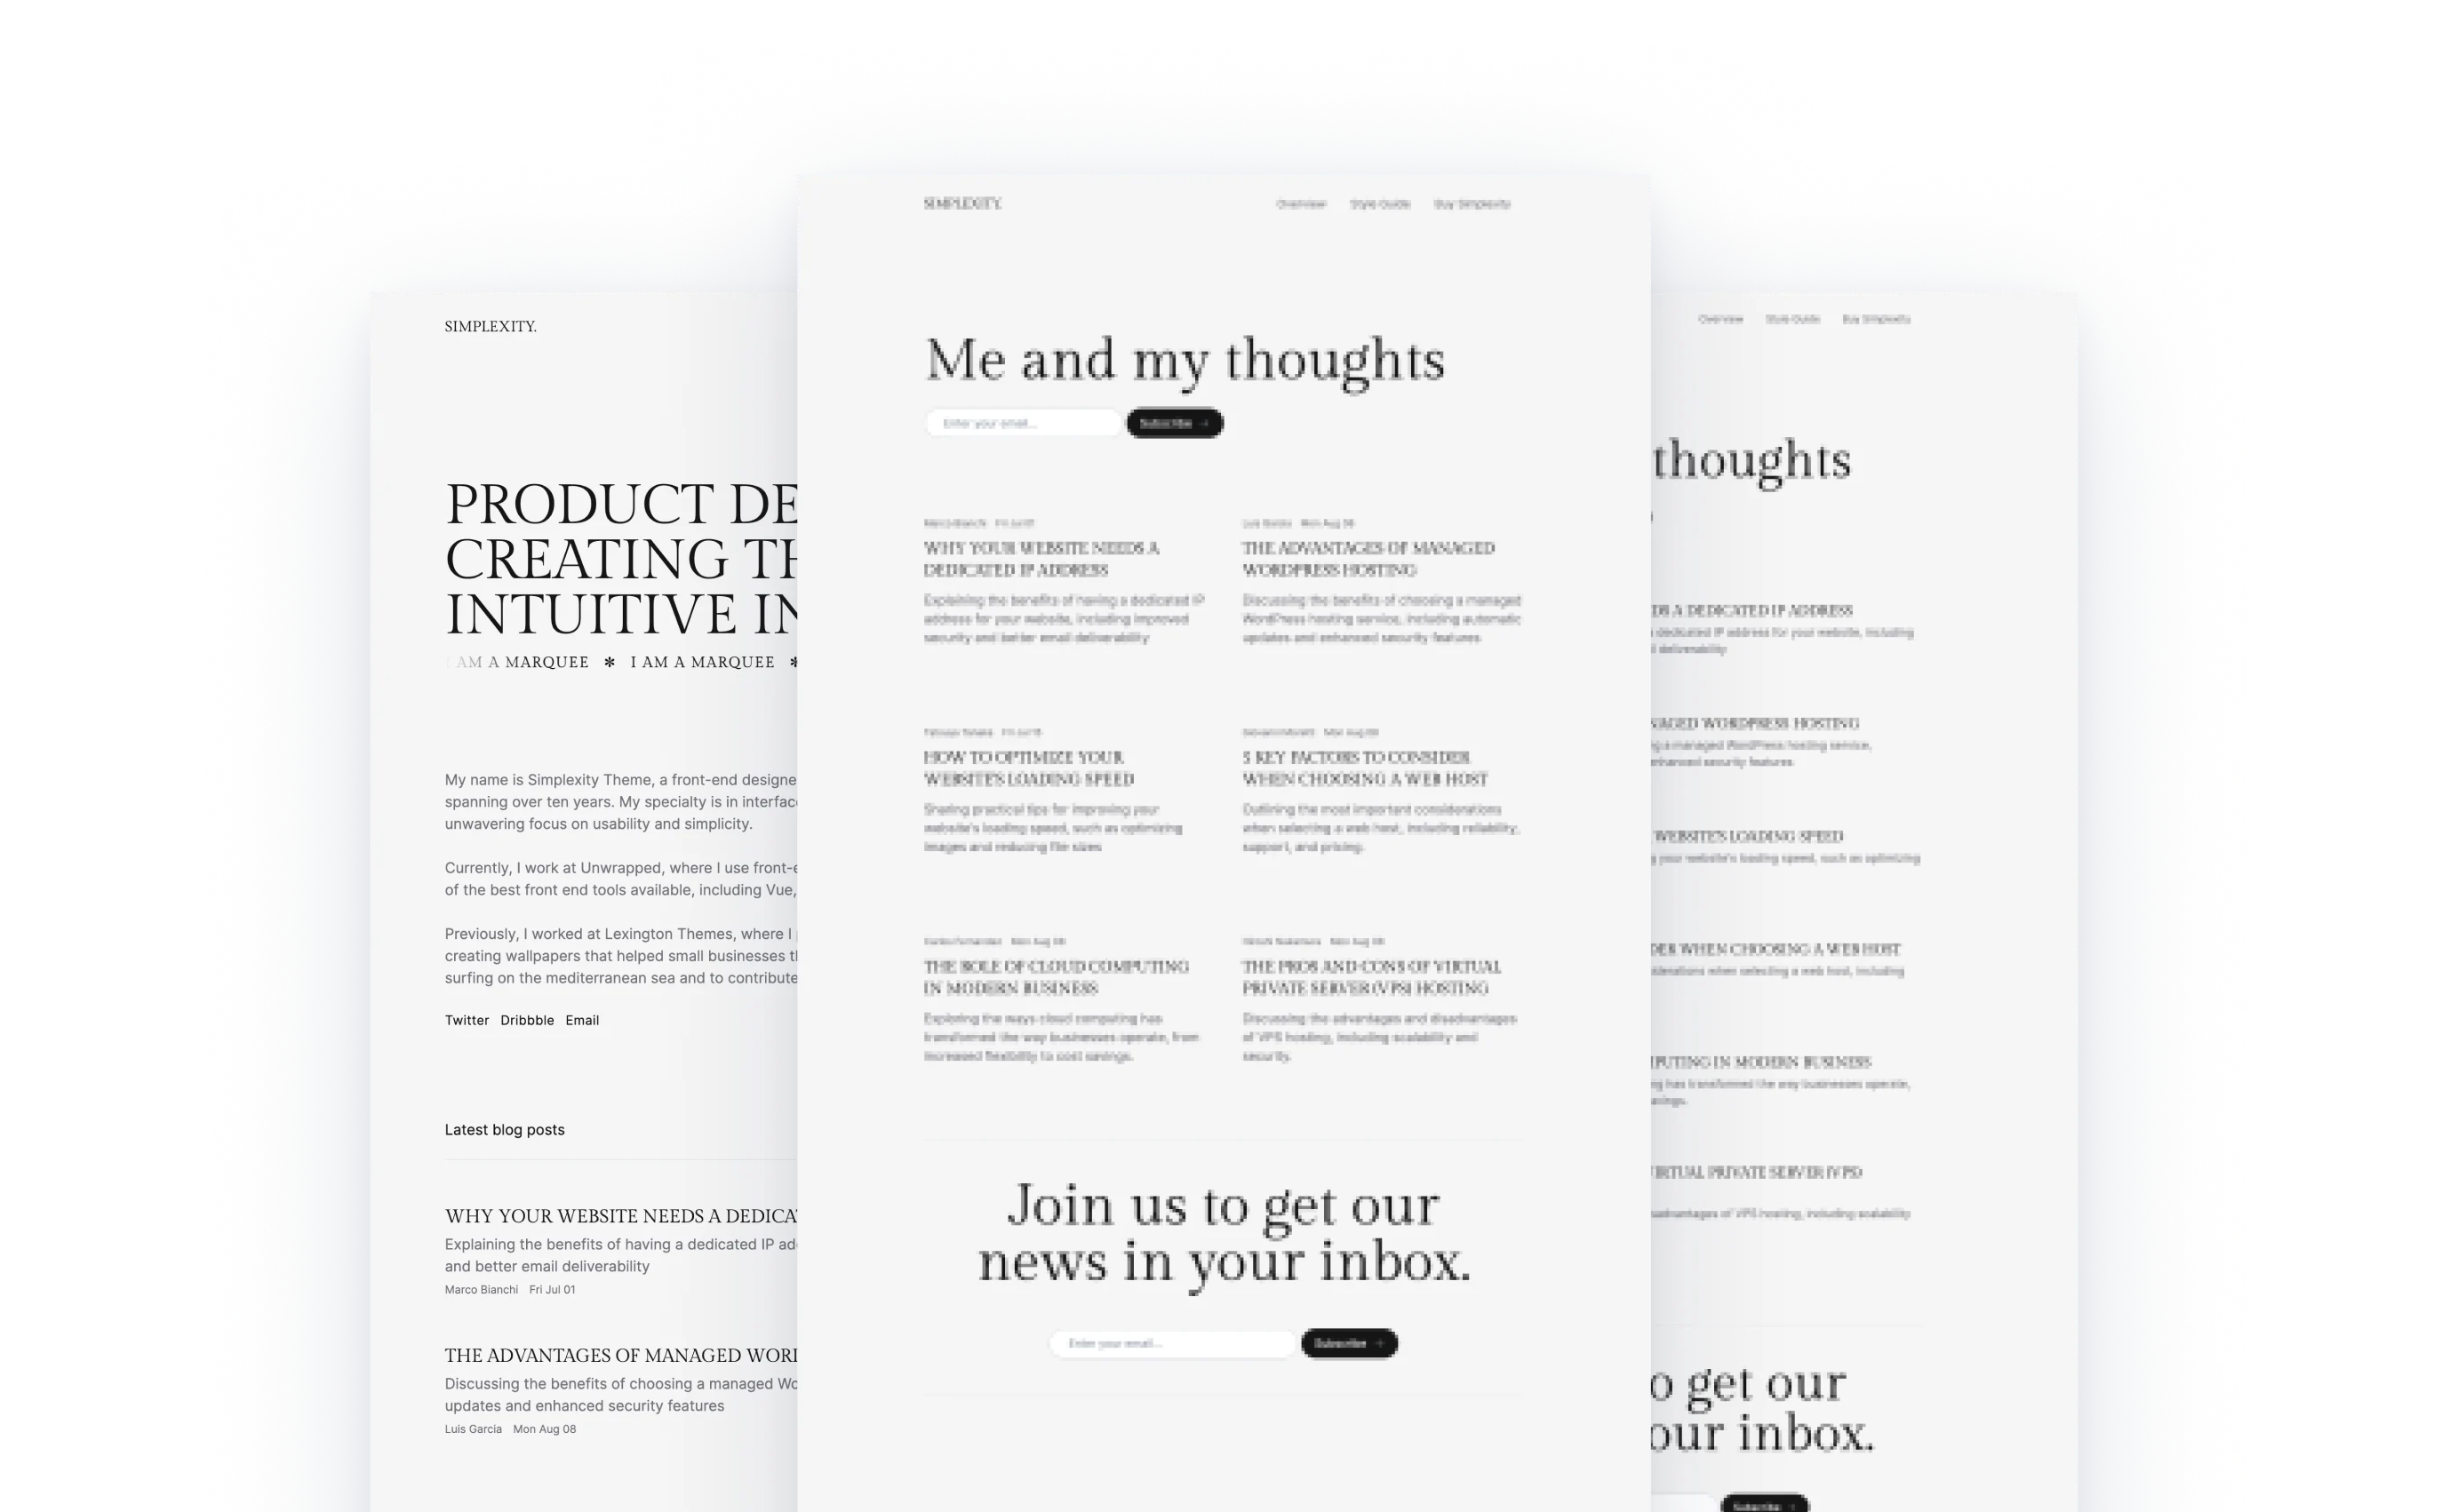 Simplexity blog theme with a minimalist design, featuring a 'Me and my thoughts' section for personal insights and a subscription invitation. Below, a series of blog post titles about web design and hosting are displayed, emphasizing clean typography and intuitive navigation.